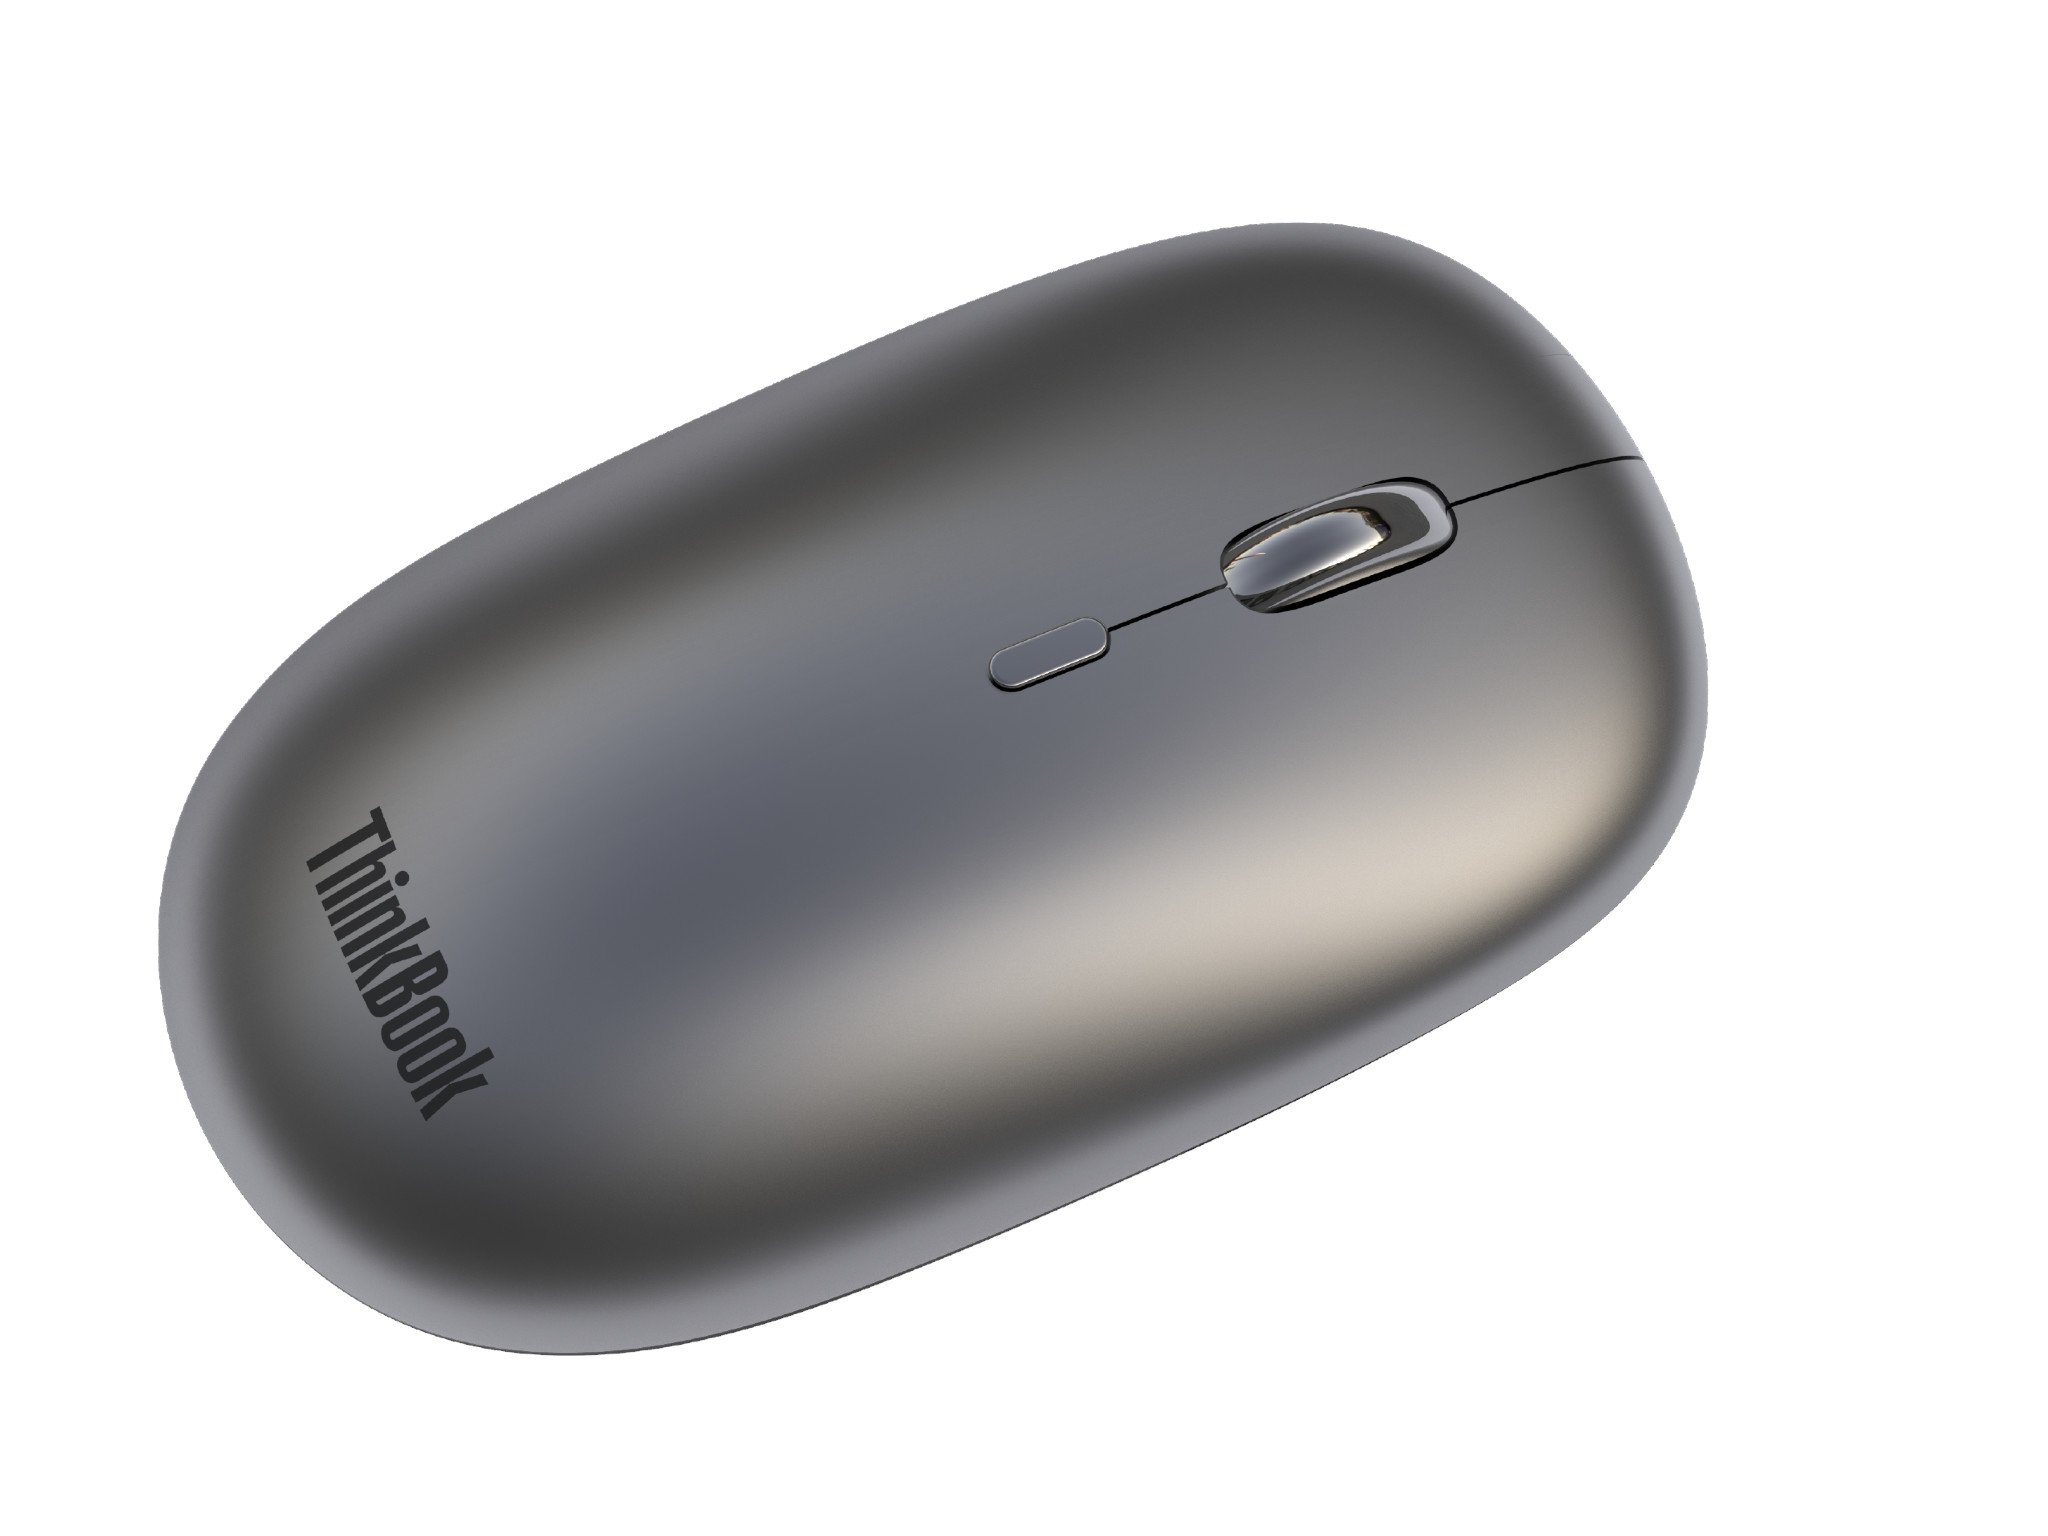 Thinkbook Mobile Mouse